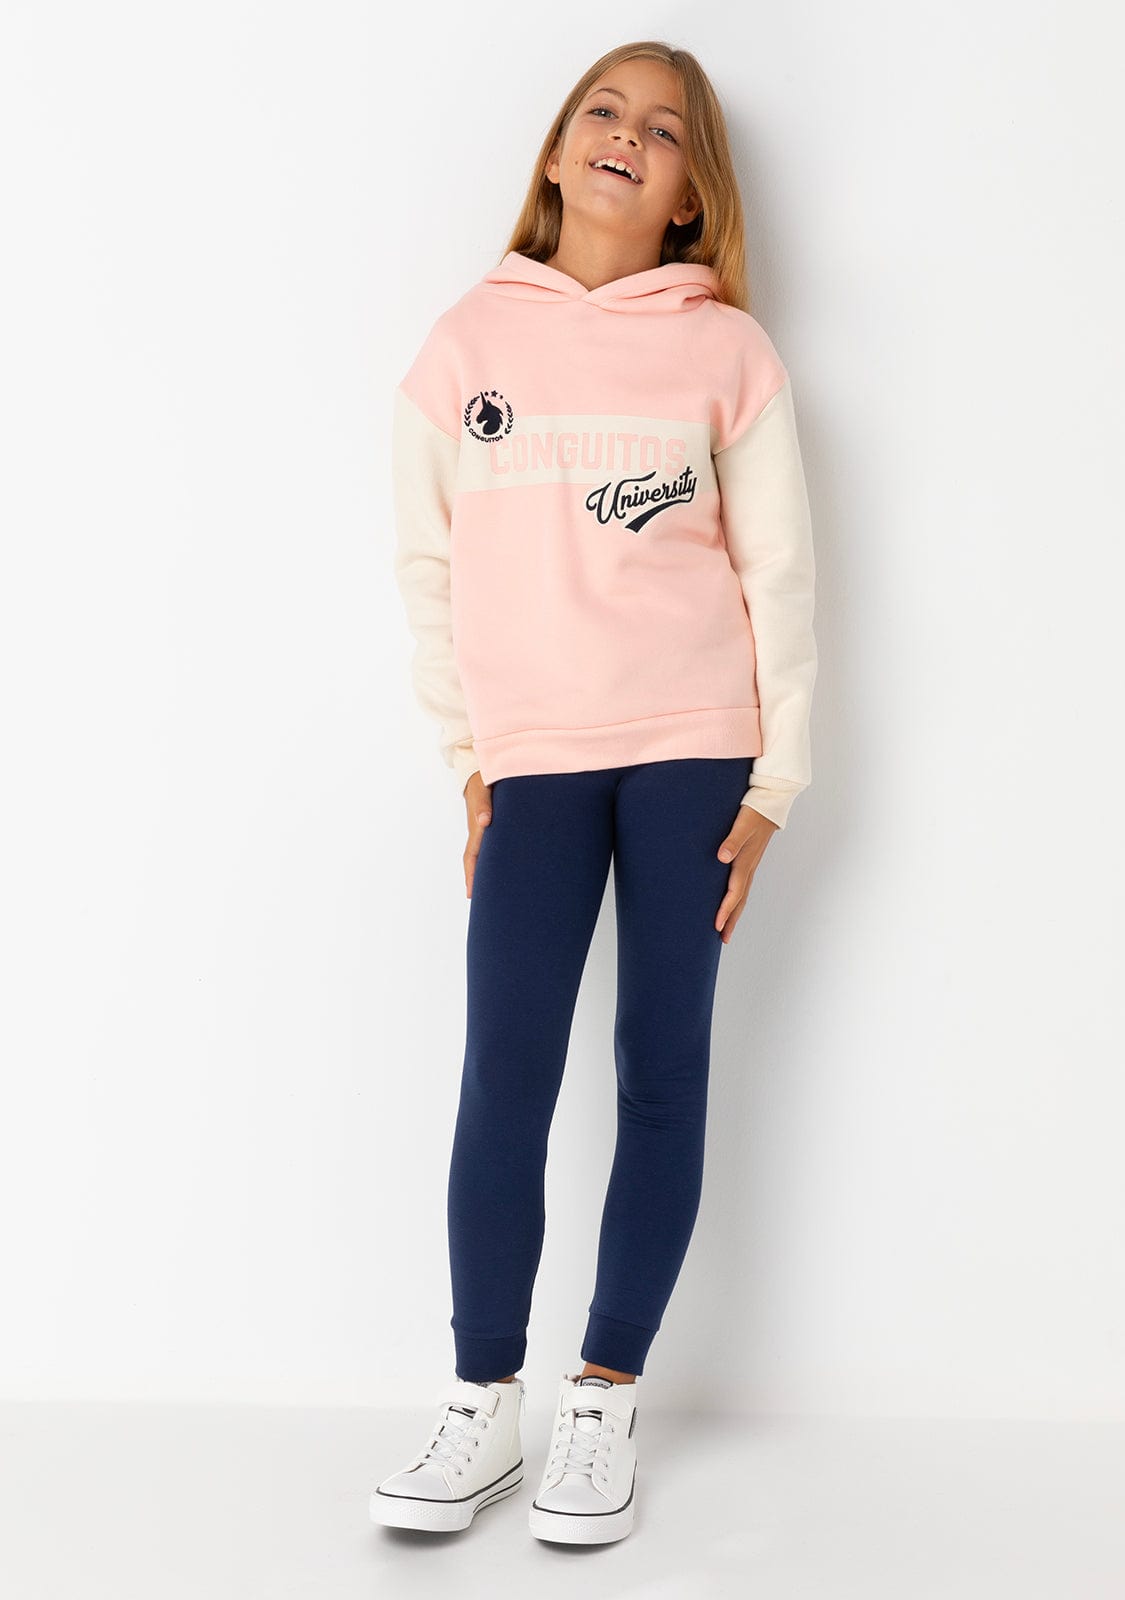 CONGUITOS TEXTIL Clothing Girl's Pink University Hoodie